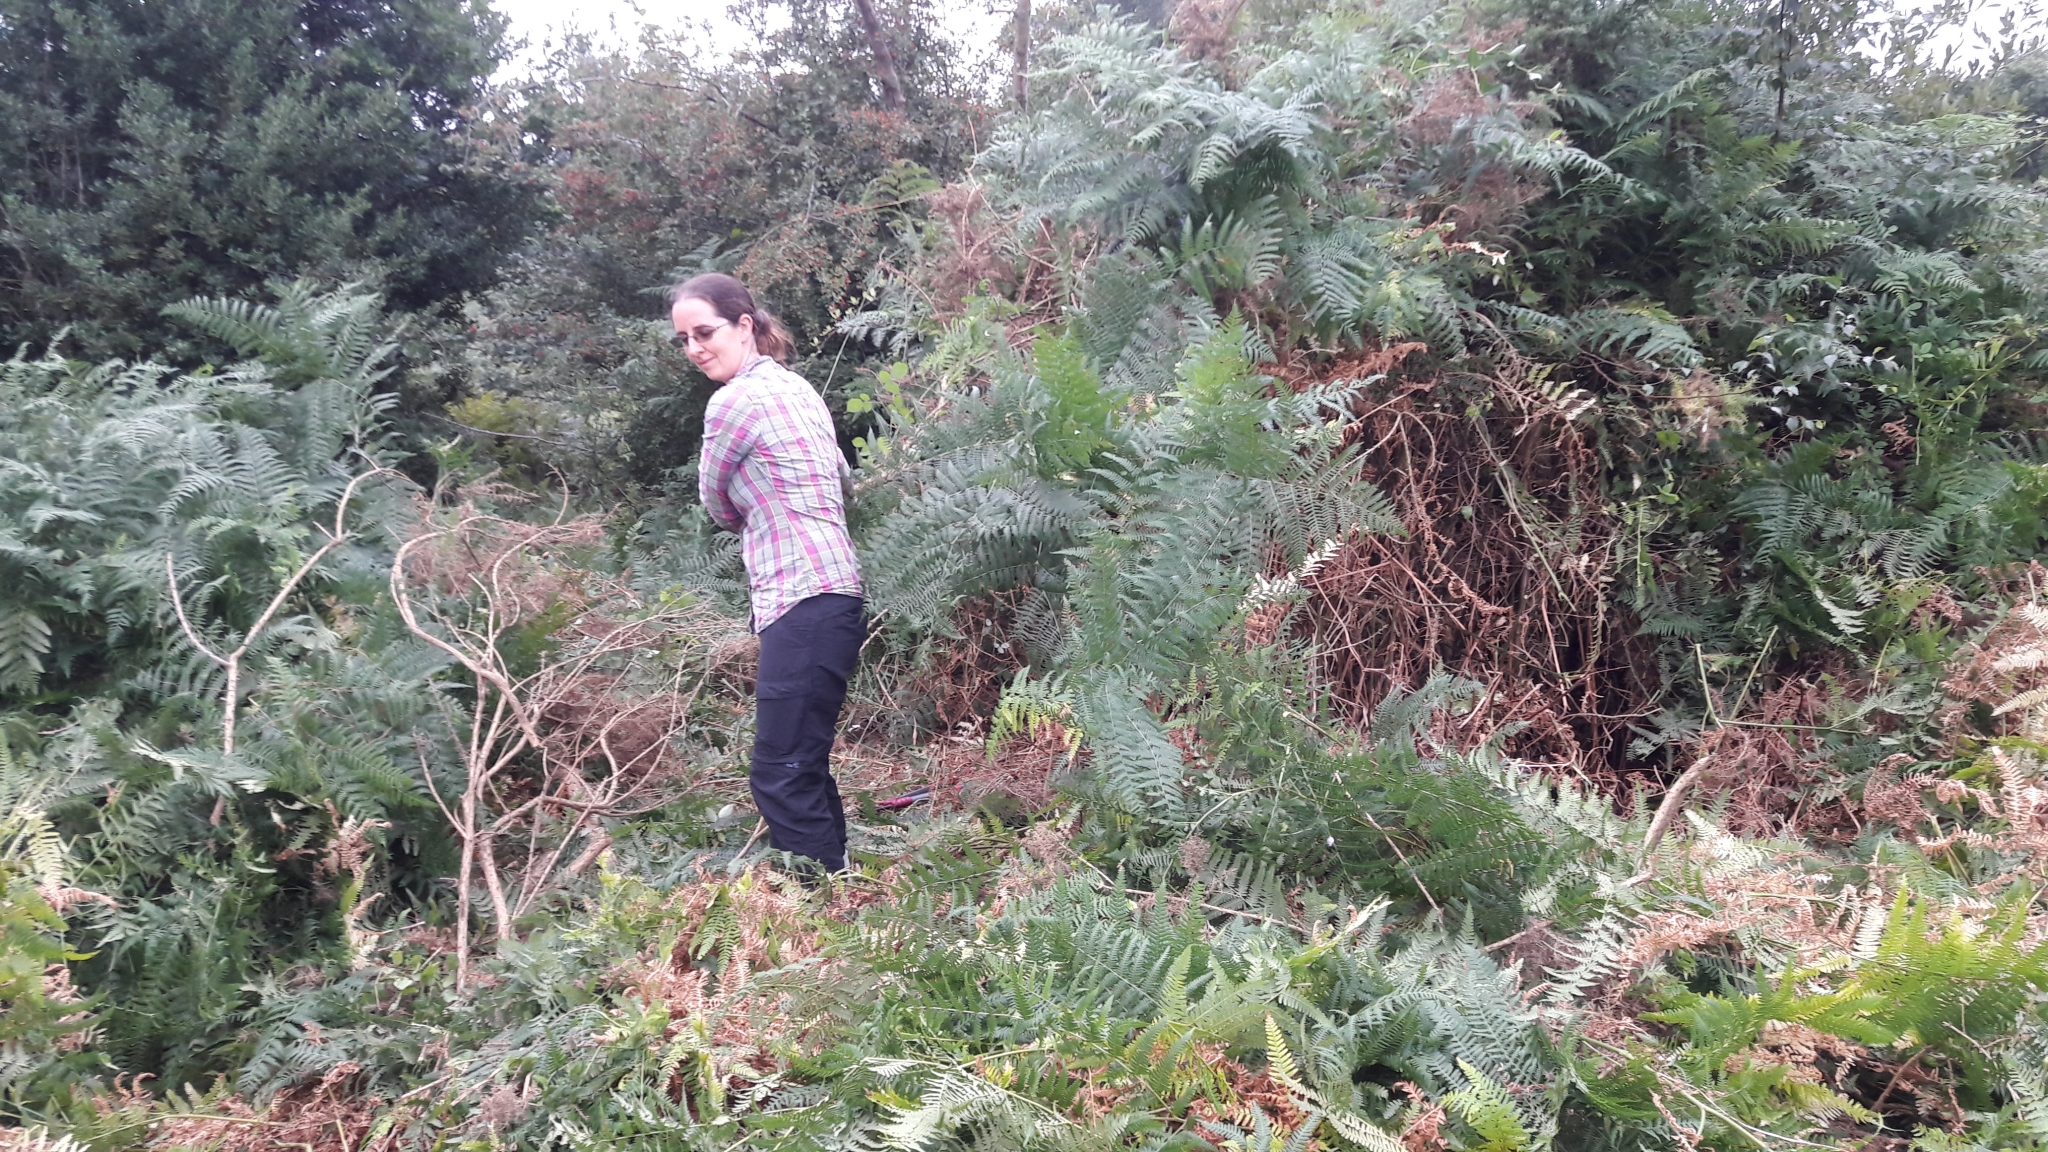 A photo from the FoTF Conservation Event - August 2018 - Gorse Removal at Hockham Hills & Holes : A volunteer amongst the Bracken